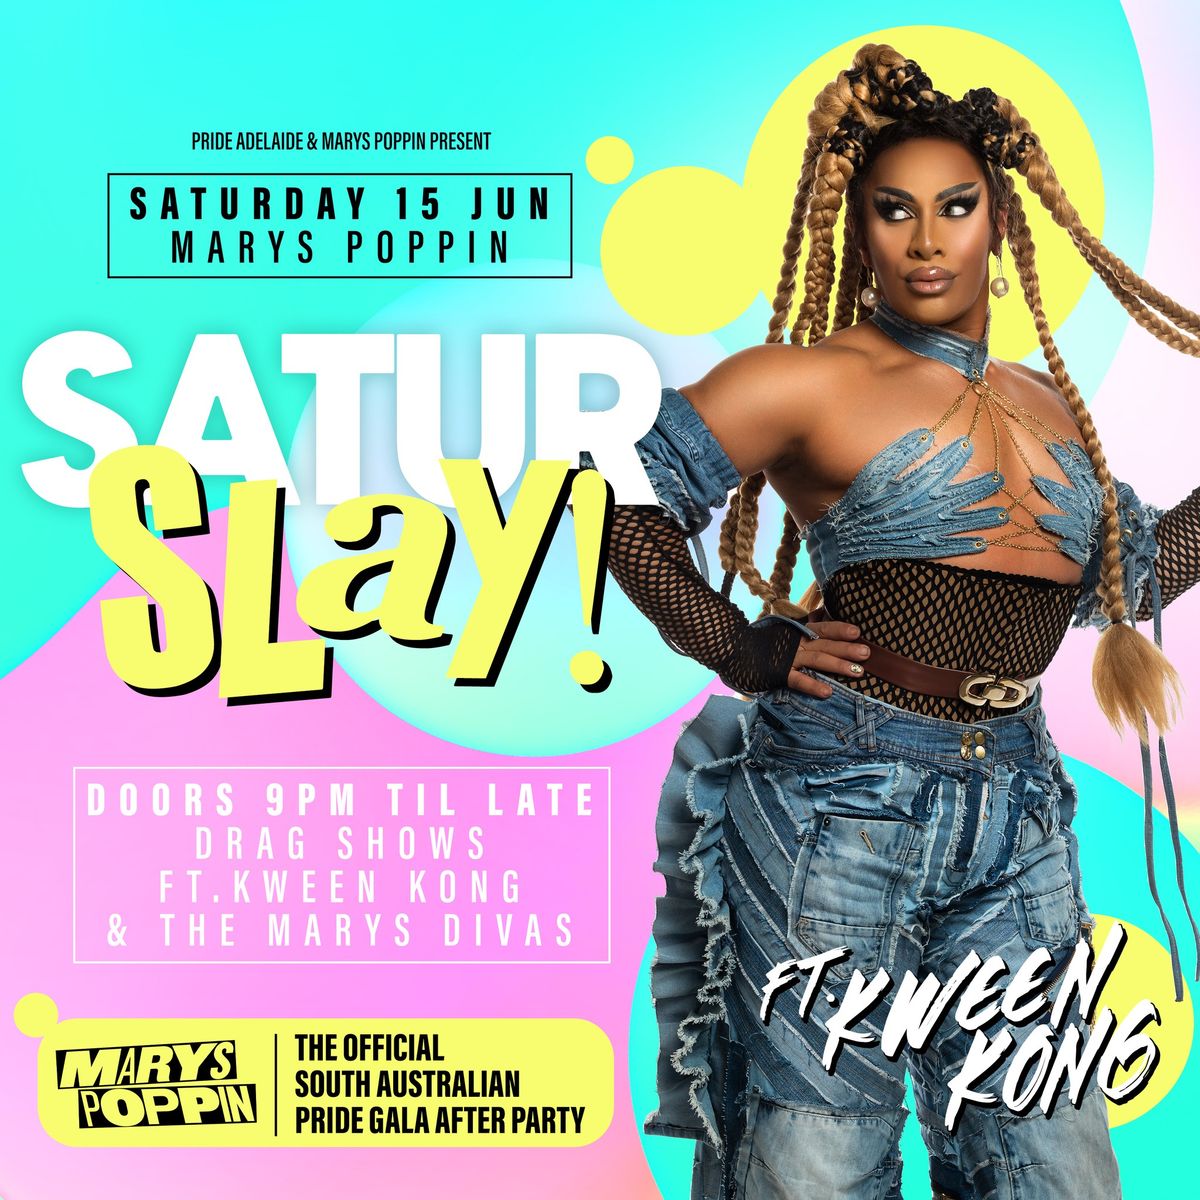 SaturSLAY (Pride Gala After Party)